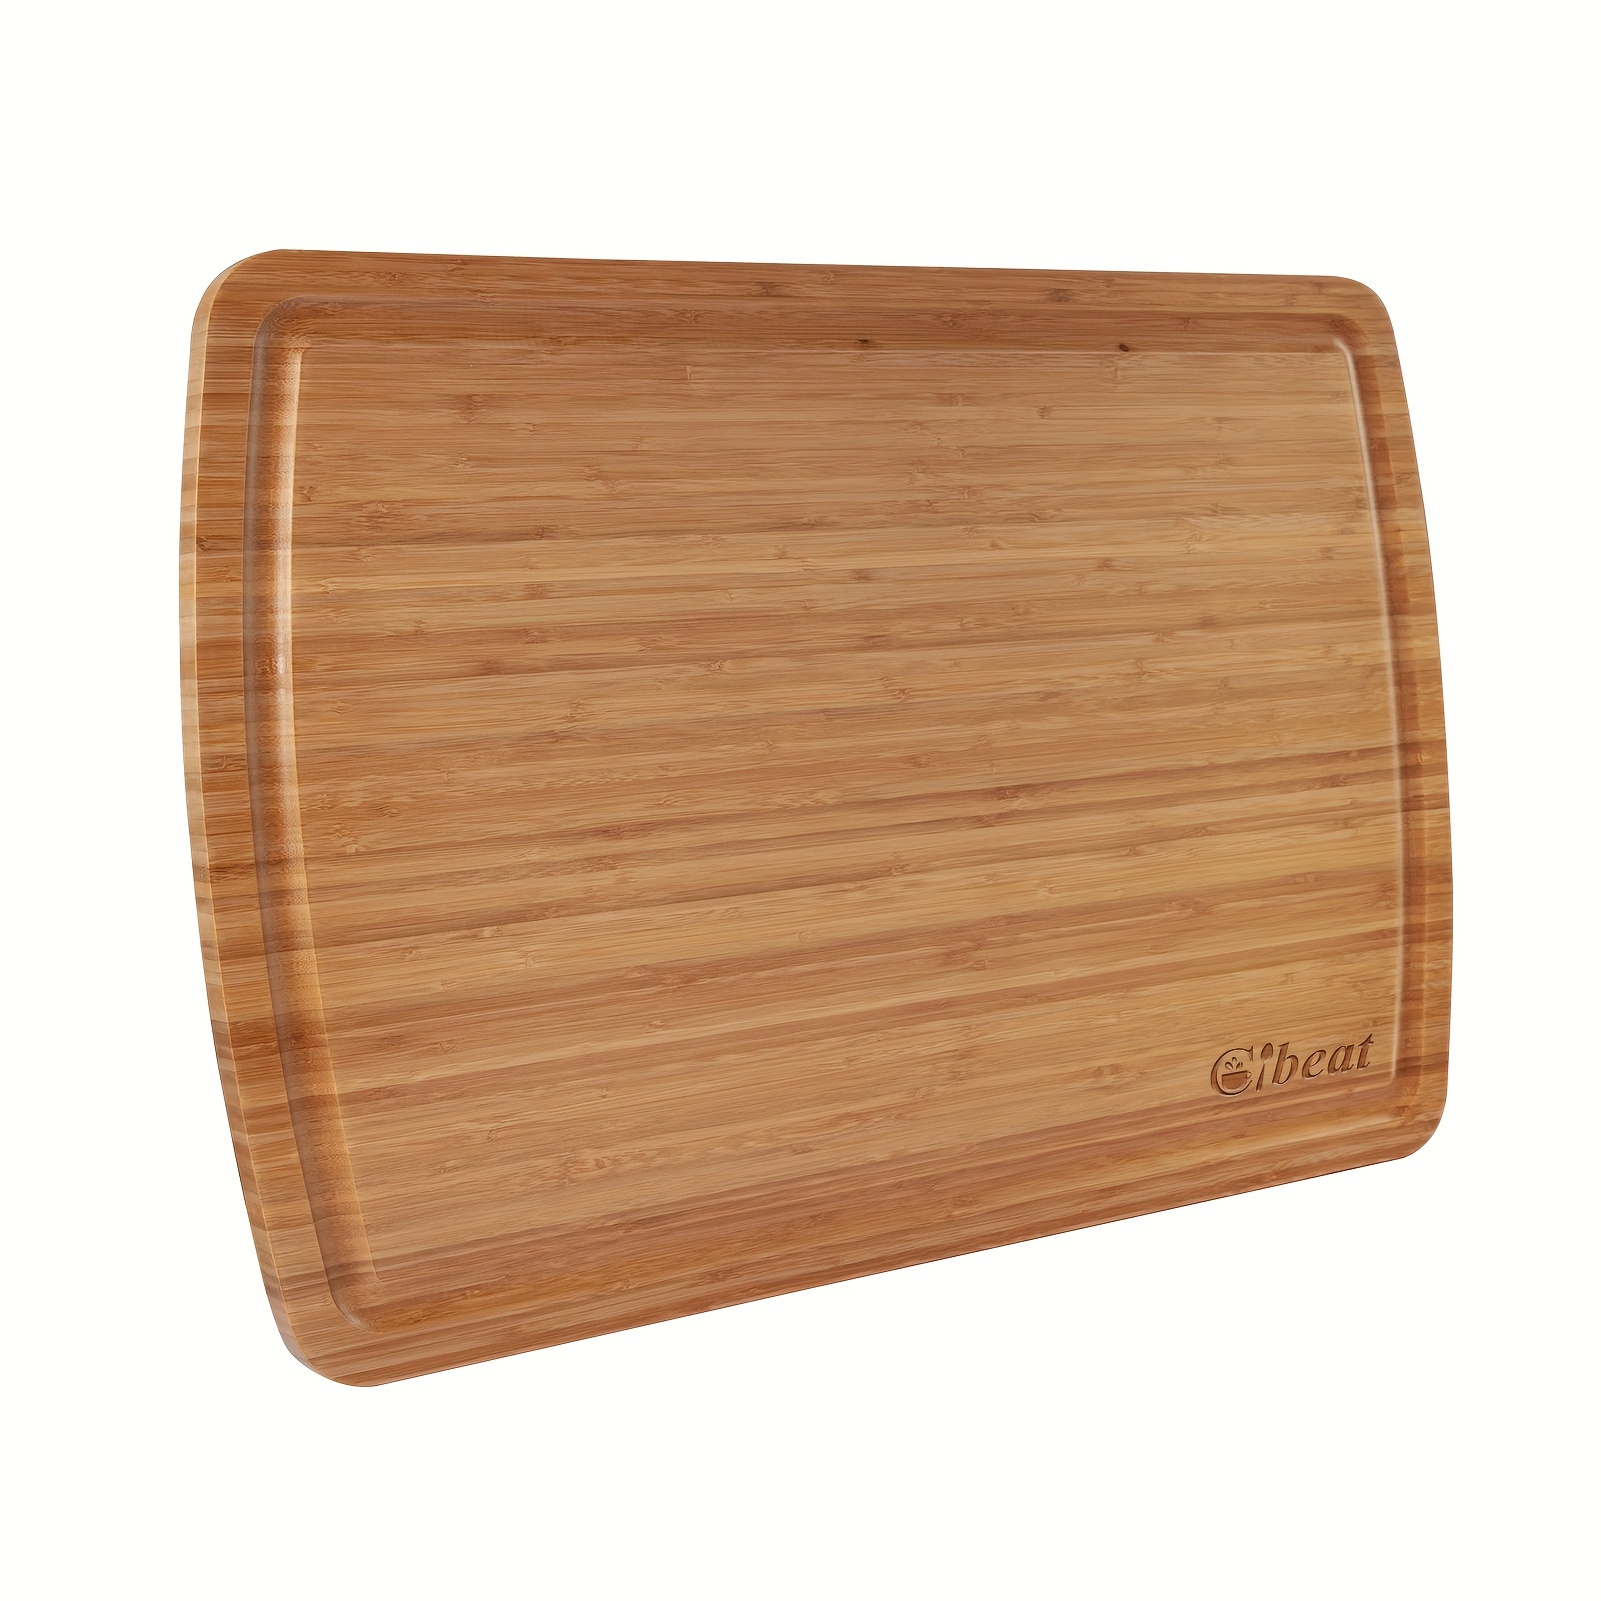 

Extra Large Cutting Board, Kitchen Bamboo Cutting Board, Bamboo Stove Cover Noodle Board, Turkey Carving Board, Extra Large Meat Cutting Board, Bbq Board